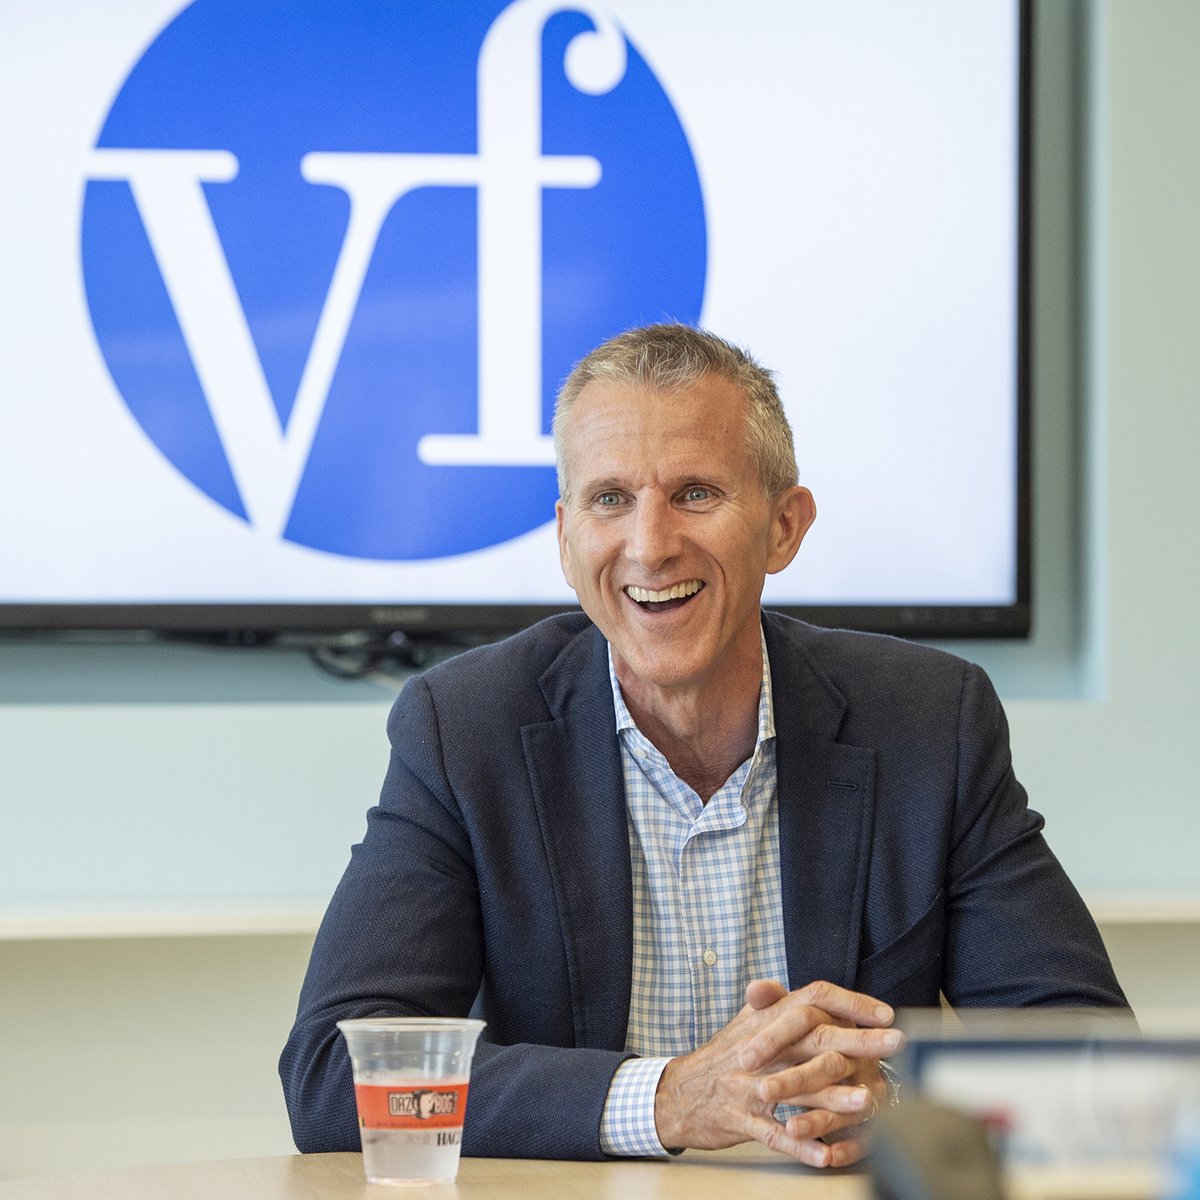 VF Corp. Stock Drops on Profit Warning, CEO's Exit - Barrons